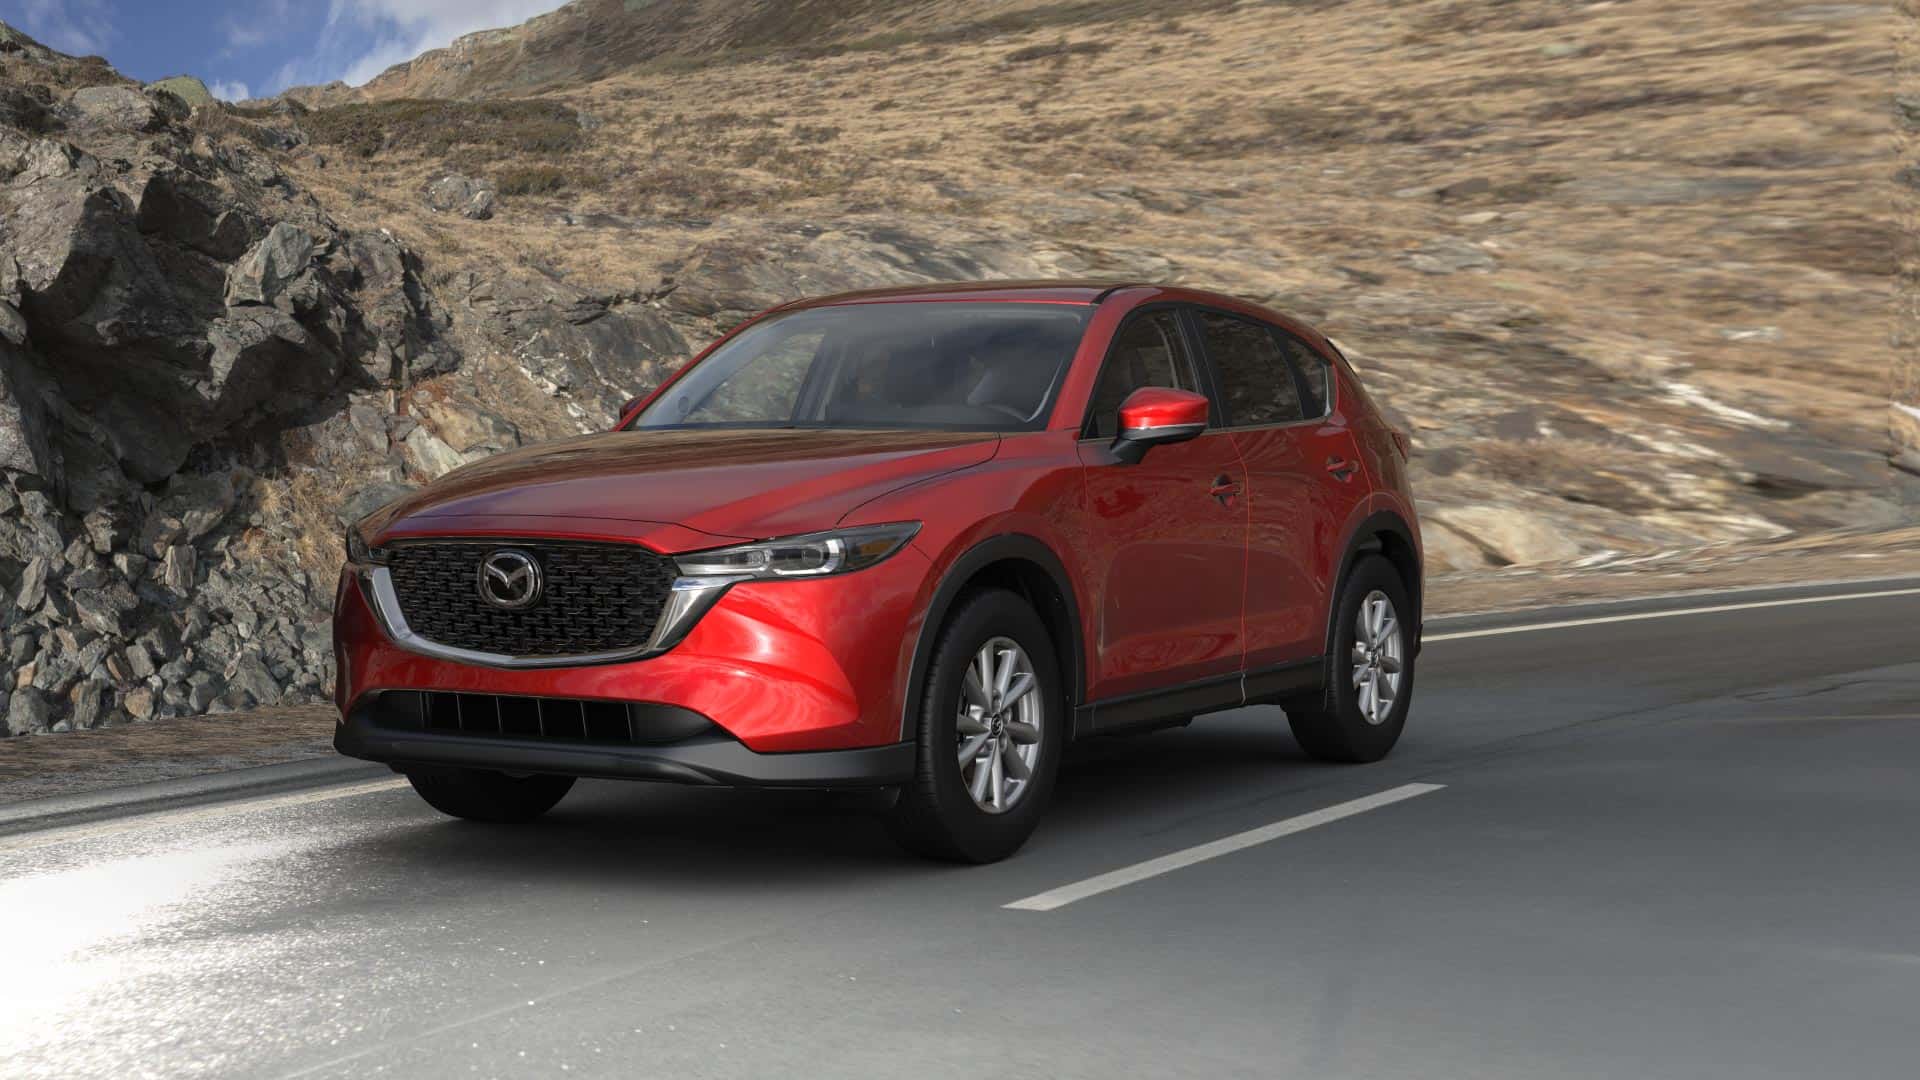 2023 Mazda CX-5 2.5 S Select Soul Red Crystal Metallic | Cascade Mazda in Cuyahoga Falls OH